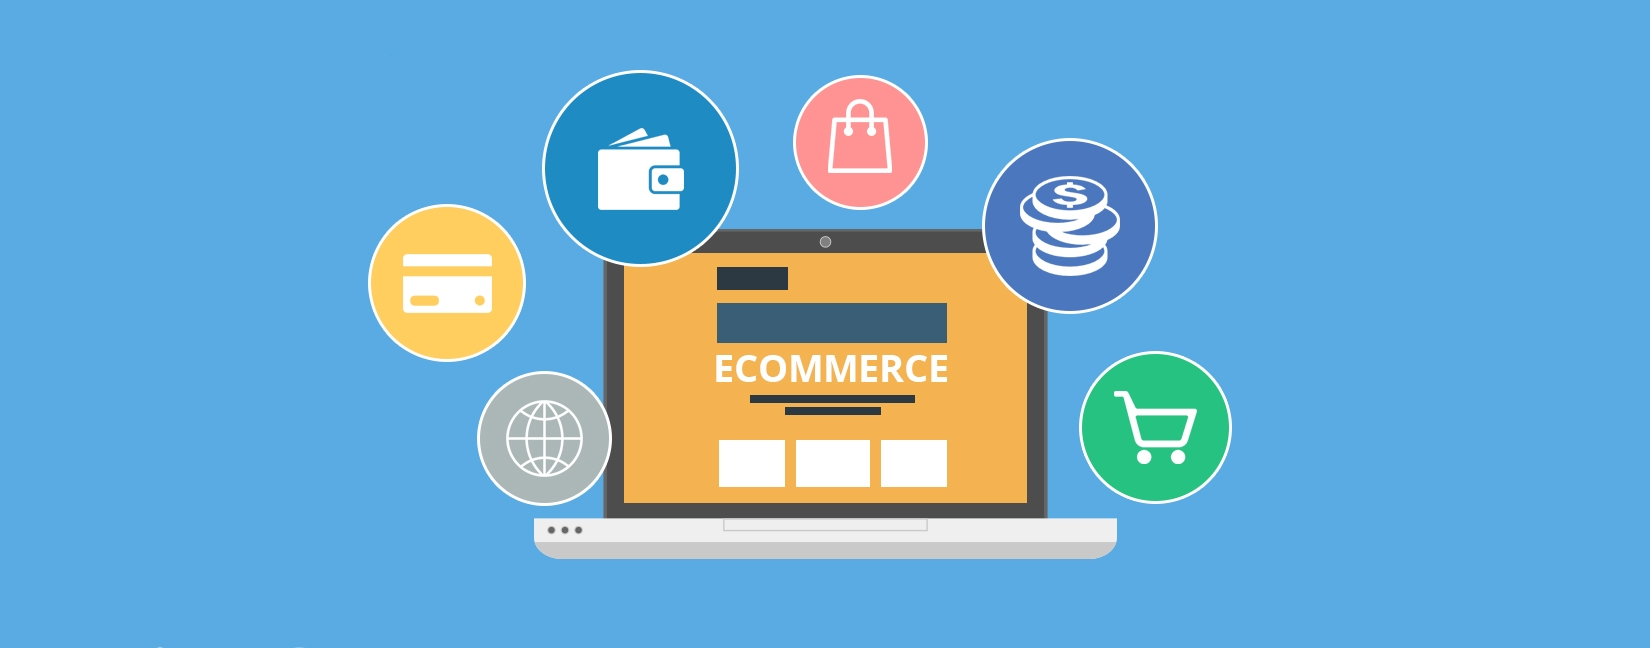 How to create your own ecommerce website | Low Cost and Free